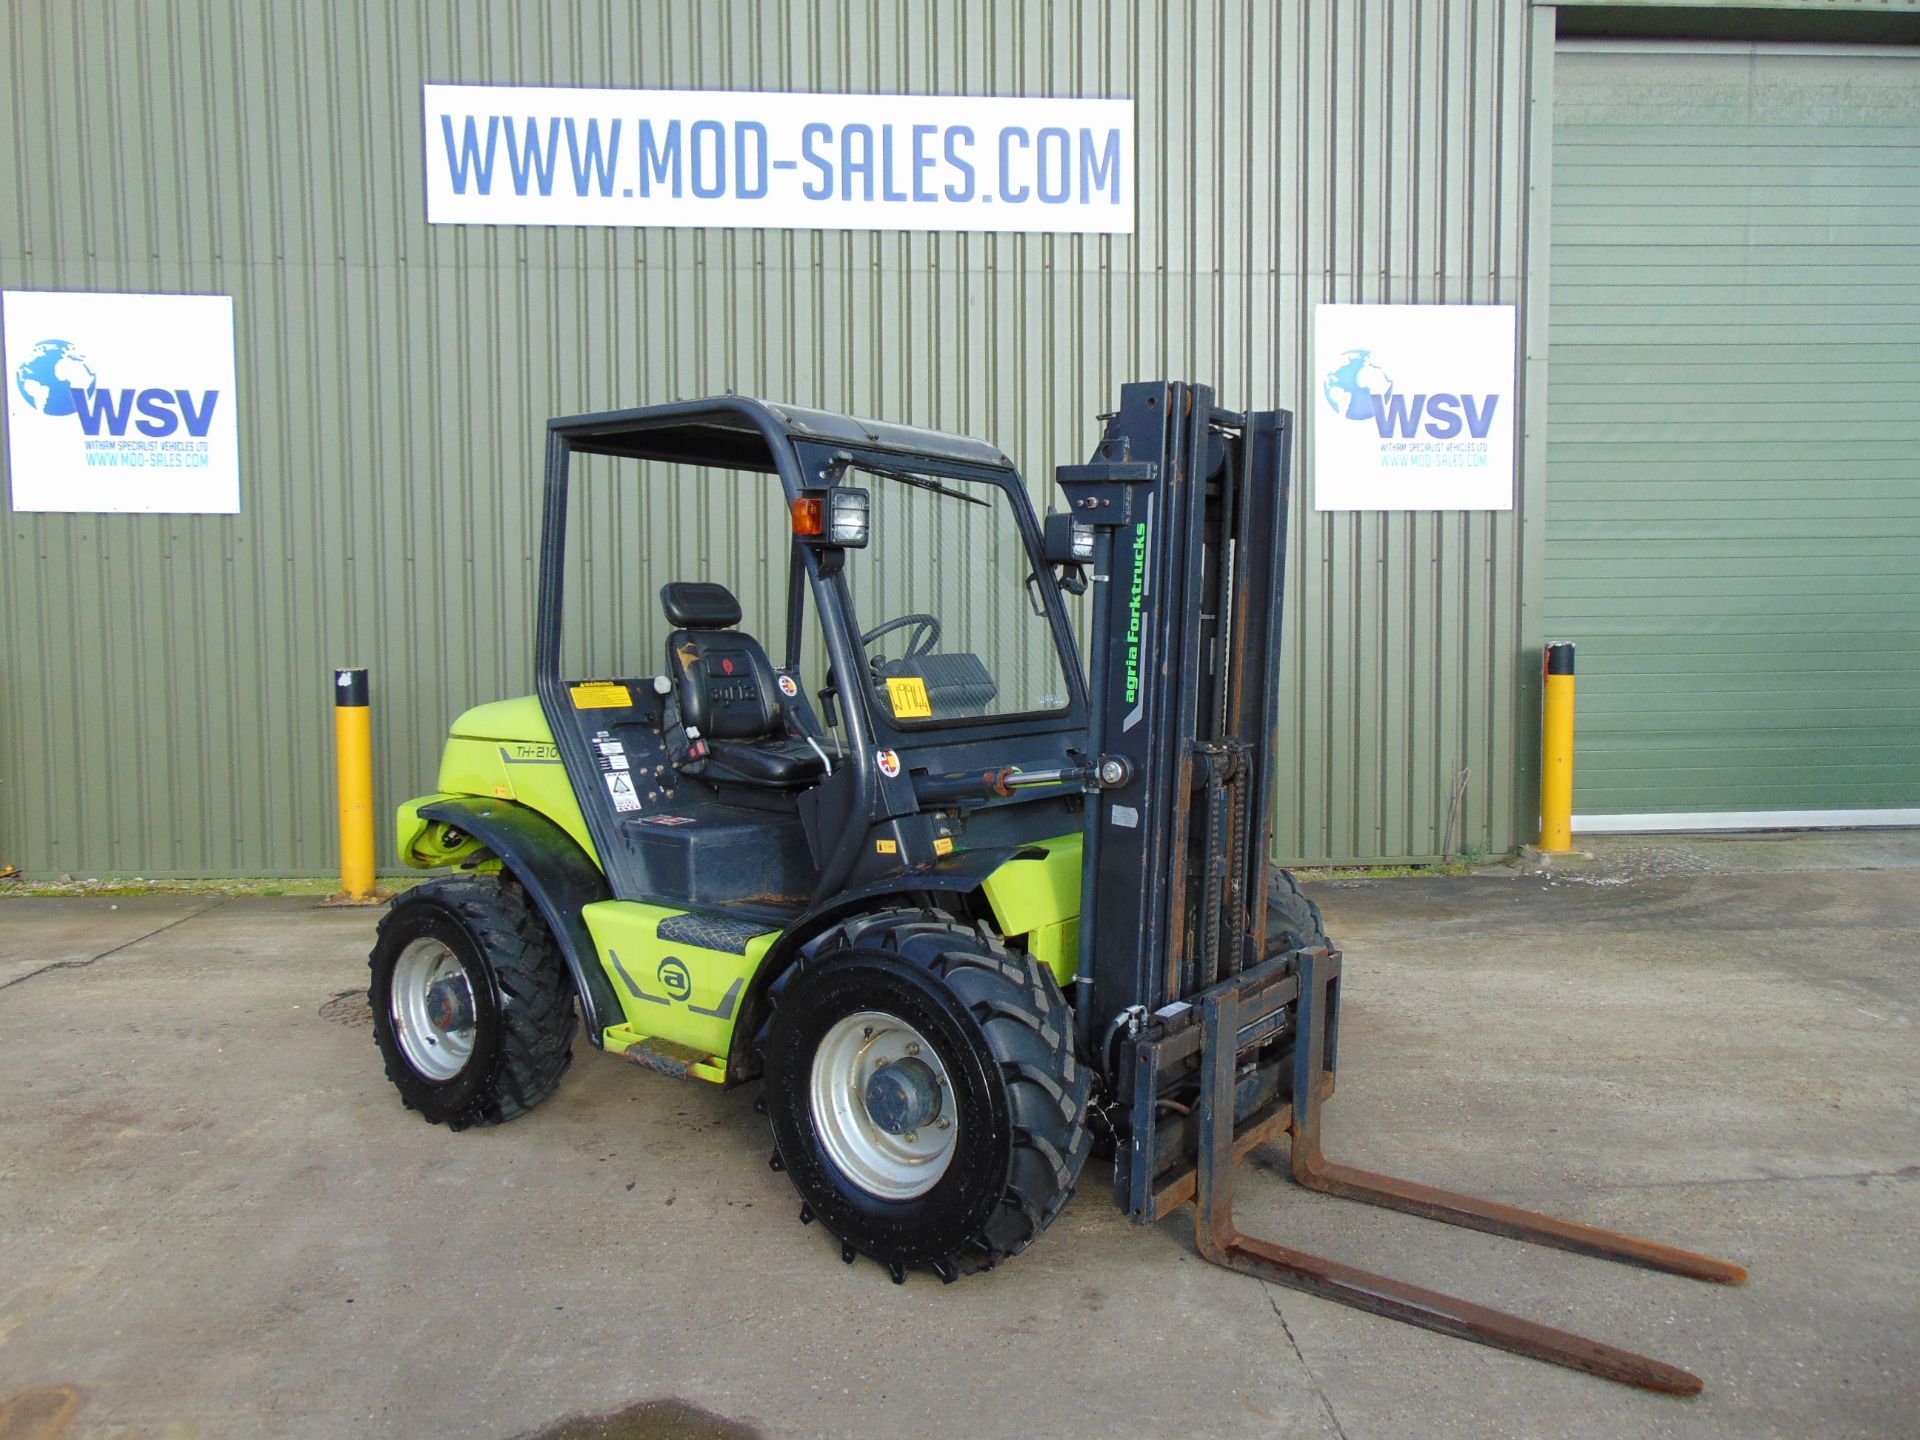 2011 Agrimac Agria TH210 4x4 Rough Terrain Diesel Forklift ONLY 1,918 HOURS!!!